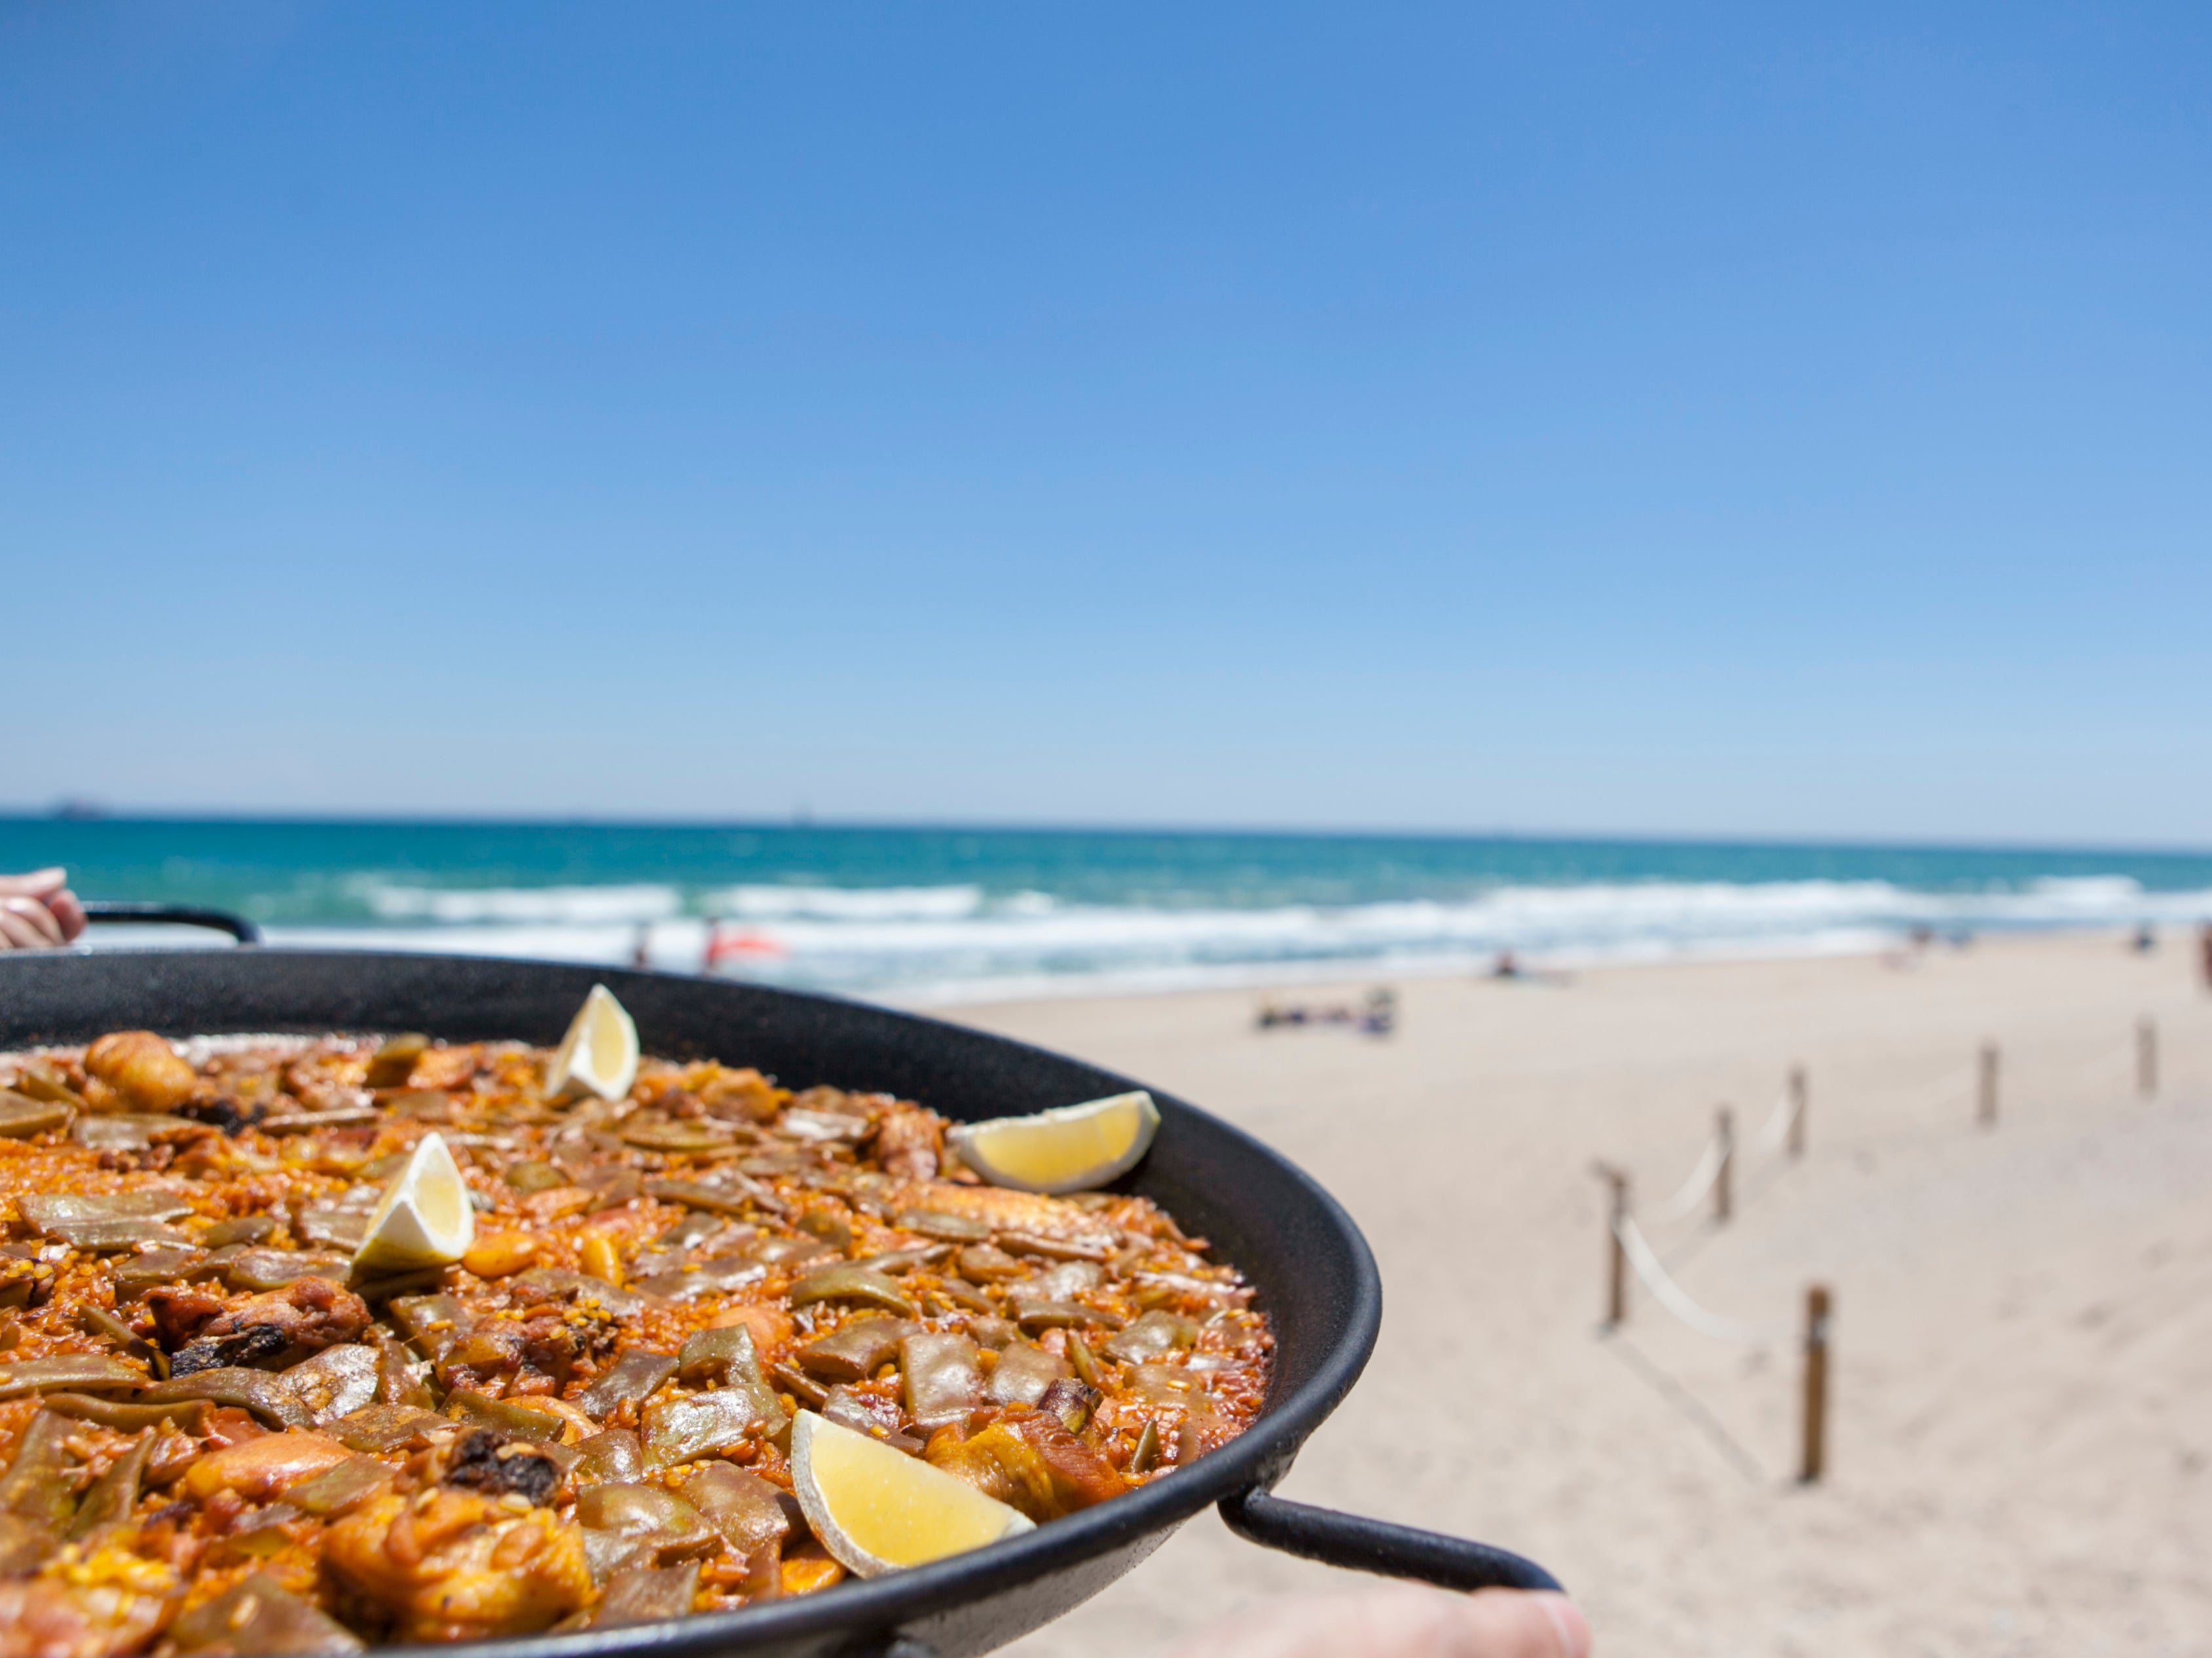 Valencia is the birthplace of paella